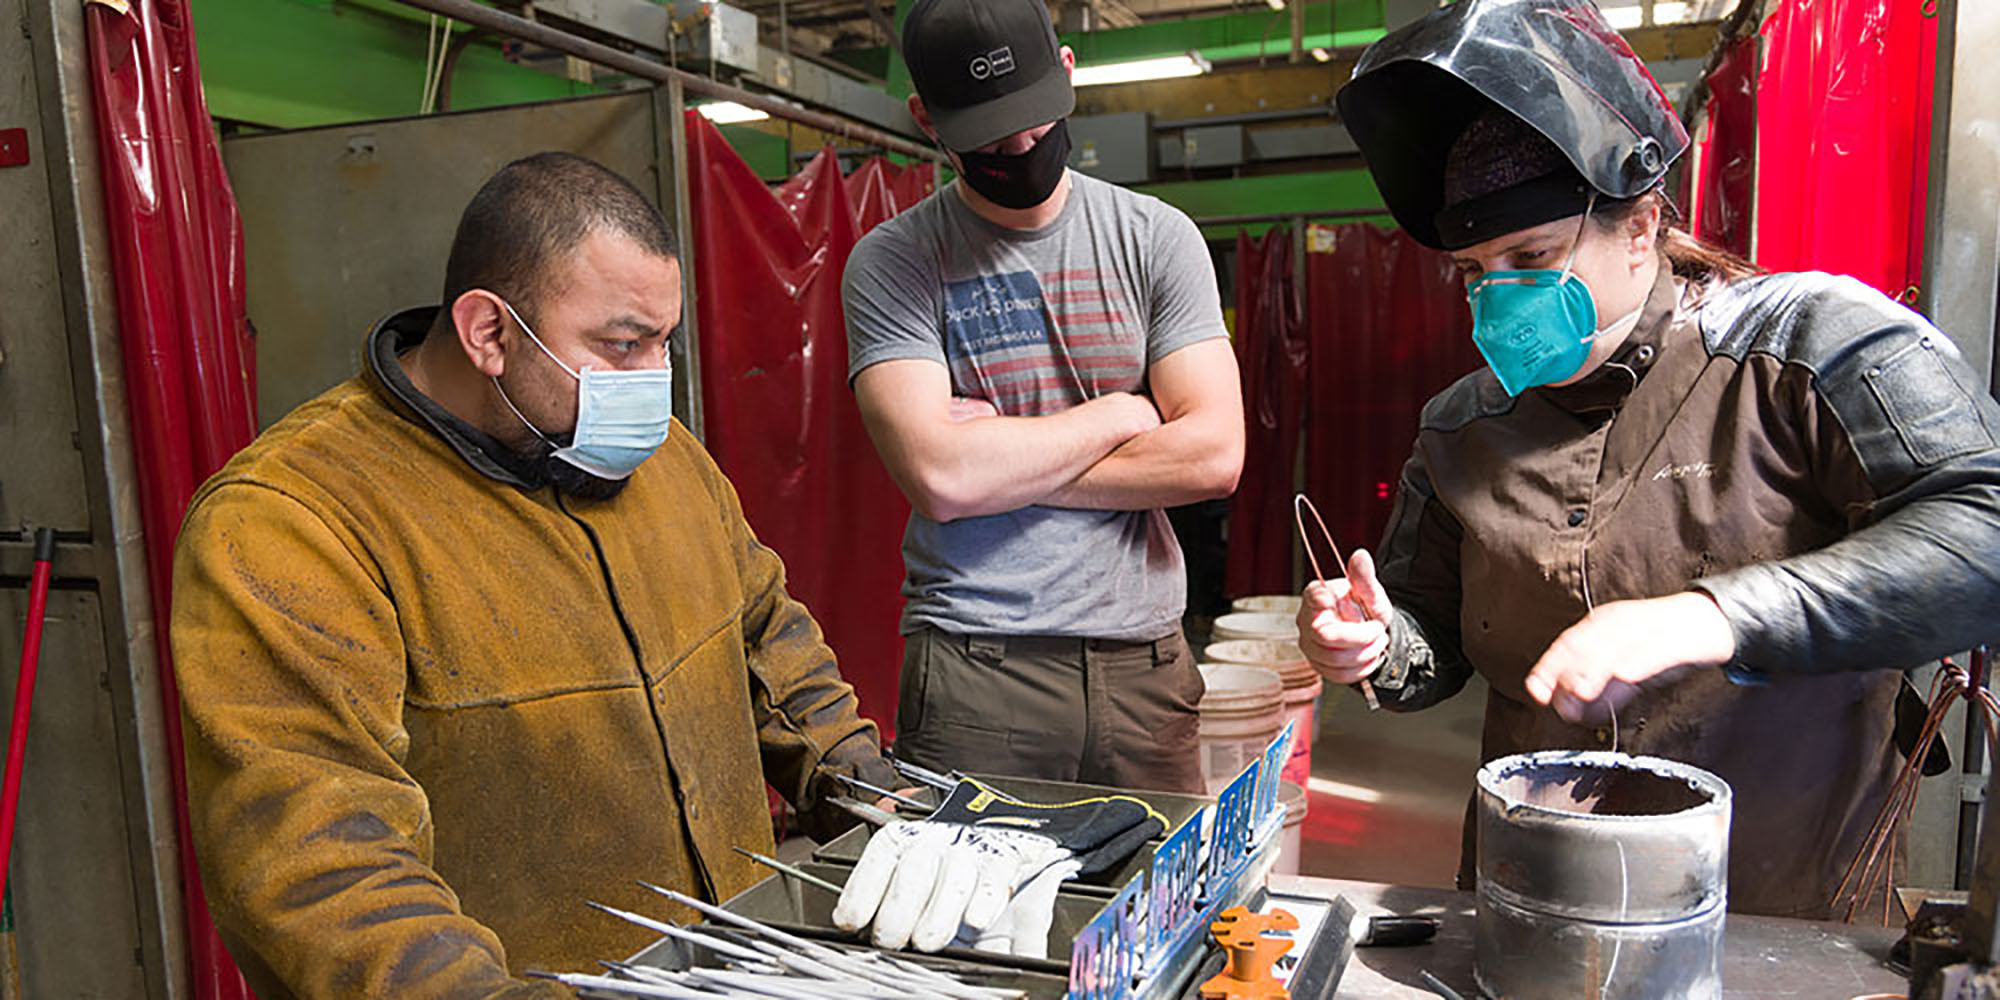 Three welding students working on a project